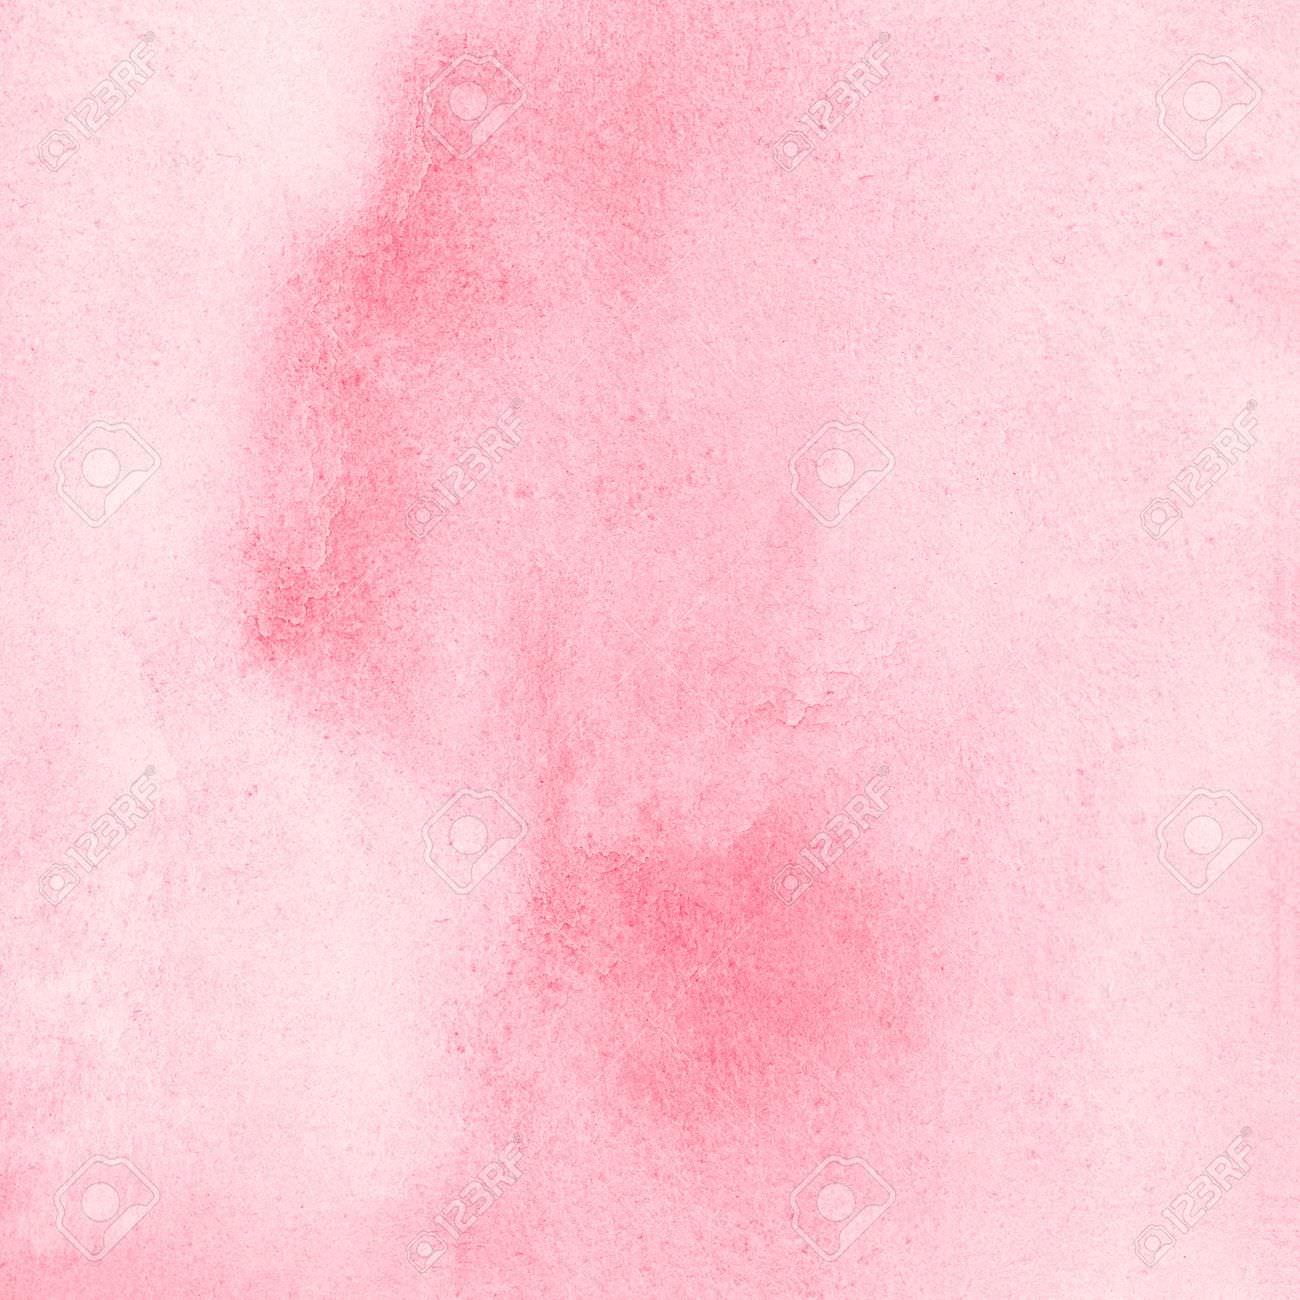 67682688 Pink Watercolor Valentines Day Background With Stains Light